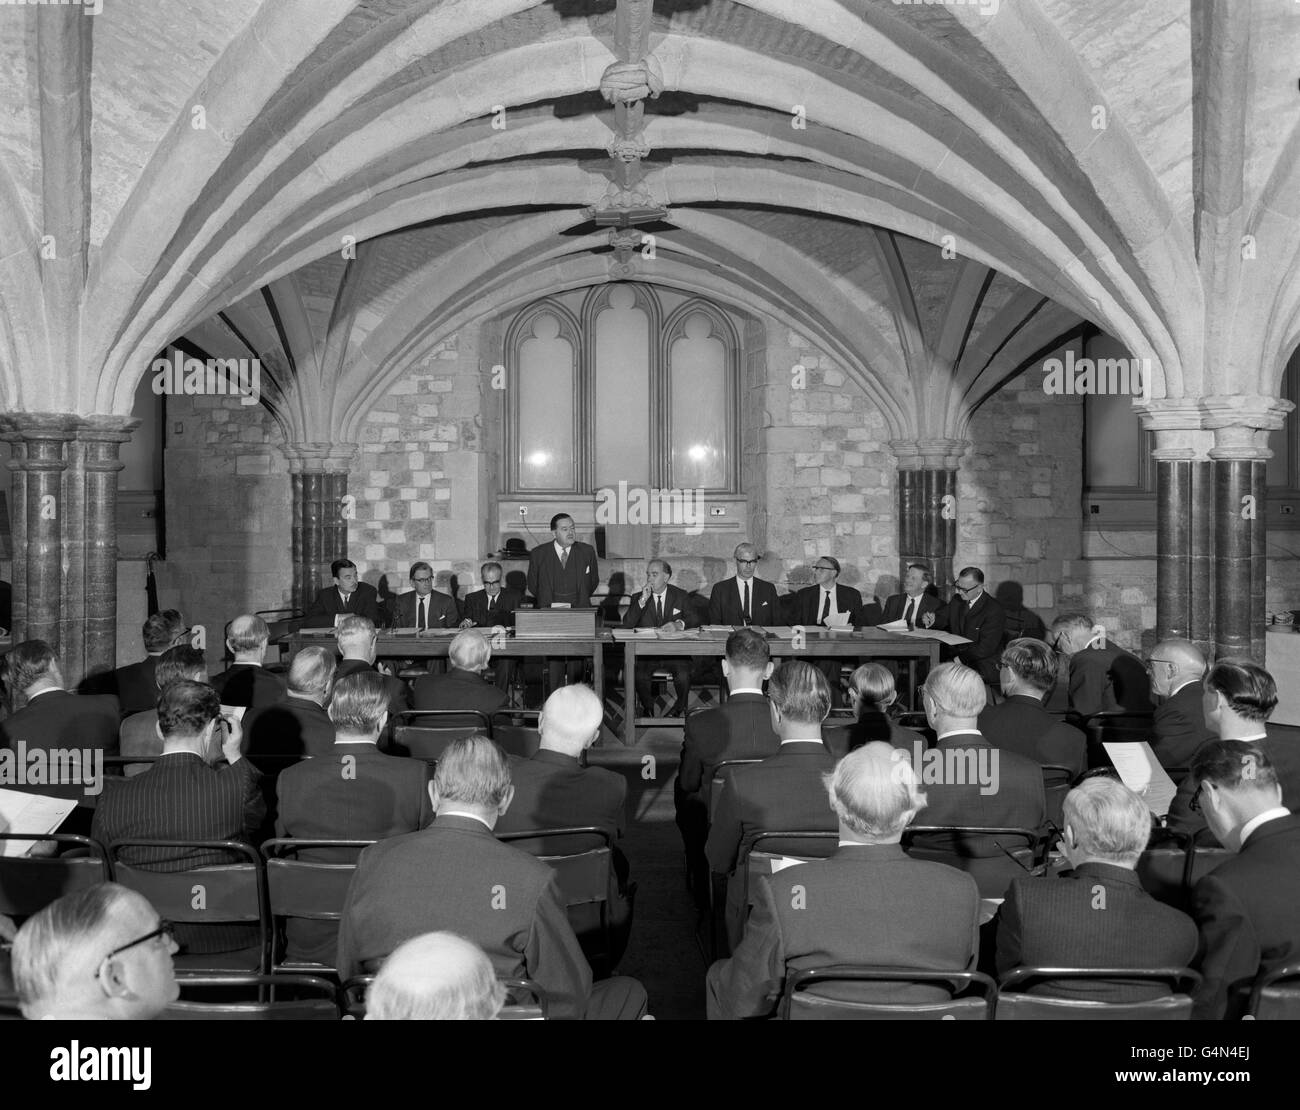 An historic setting, the Crypt beneath Guildhall, London, for the one hundredth annual general meeting of The Press Association, Britain's national news agency, which is celebrating it's centenary. The Chairman of the PA, Mr W D Barnetson (Chairman and Joint Managing Director, United Newspapers Ltd.), is seen addressing the meeting. Seated at the tables are directors and two of the officers of the Association. (l-r) L. J. Stallard (Joint Managing Director and General Manager, the Midland News Association Ltd), the Vice-Chairman, A. M Burnett-Stuart (Joint Deputy Managing Director, Thomson Stock Photo